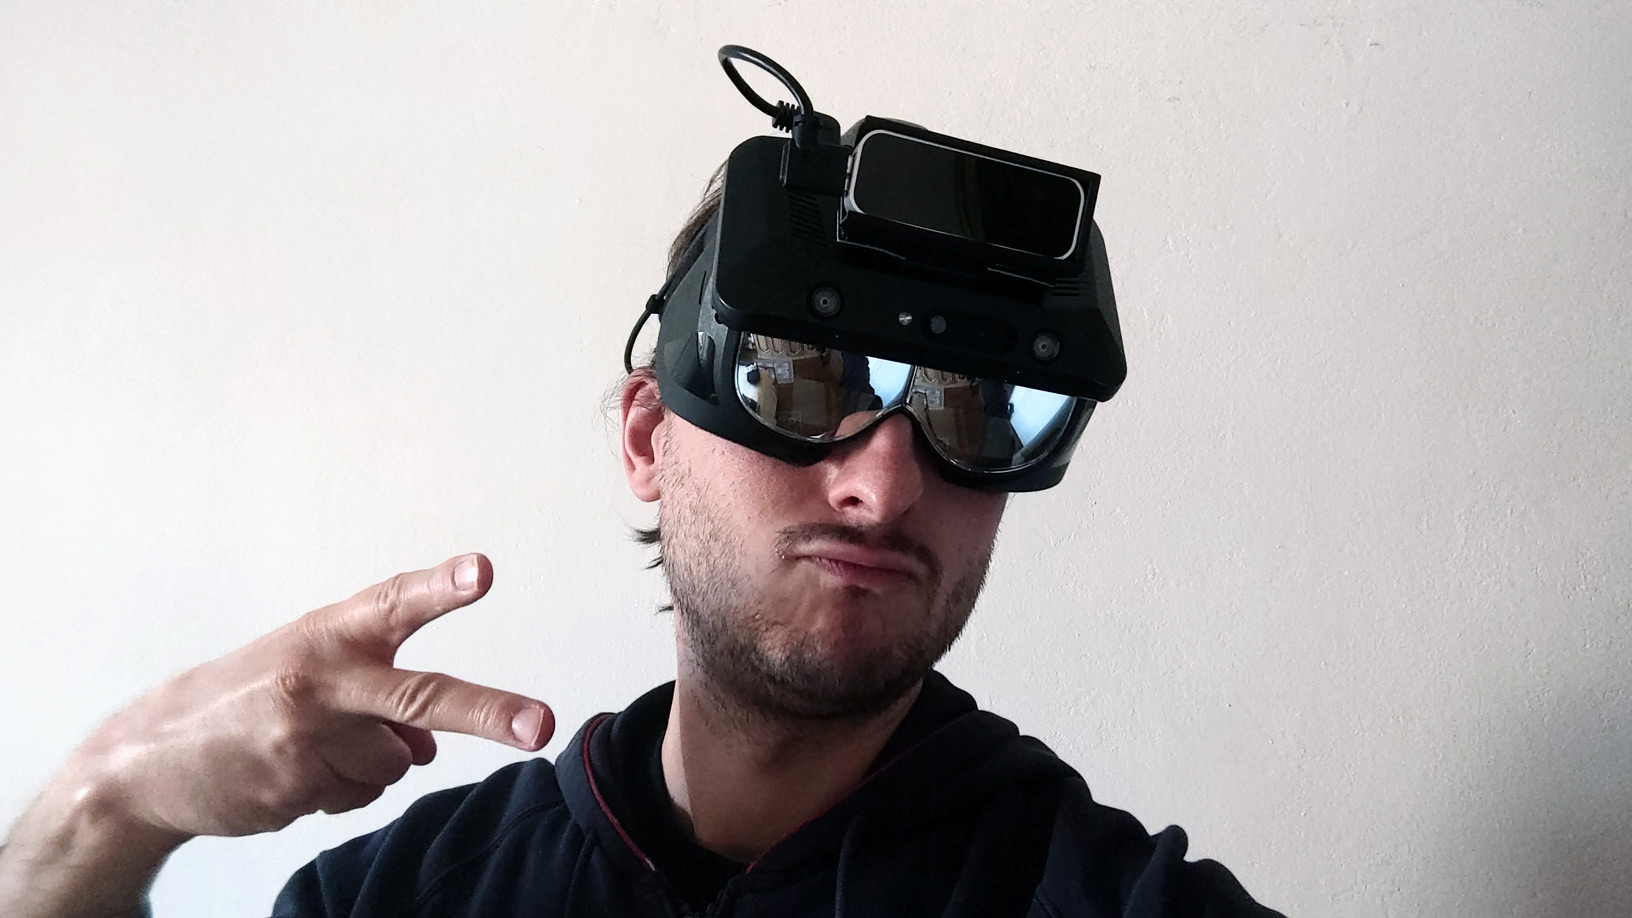 RealMax Qian review: wide FOV AR is amazing!